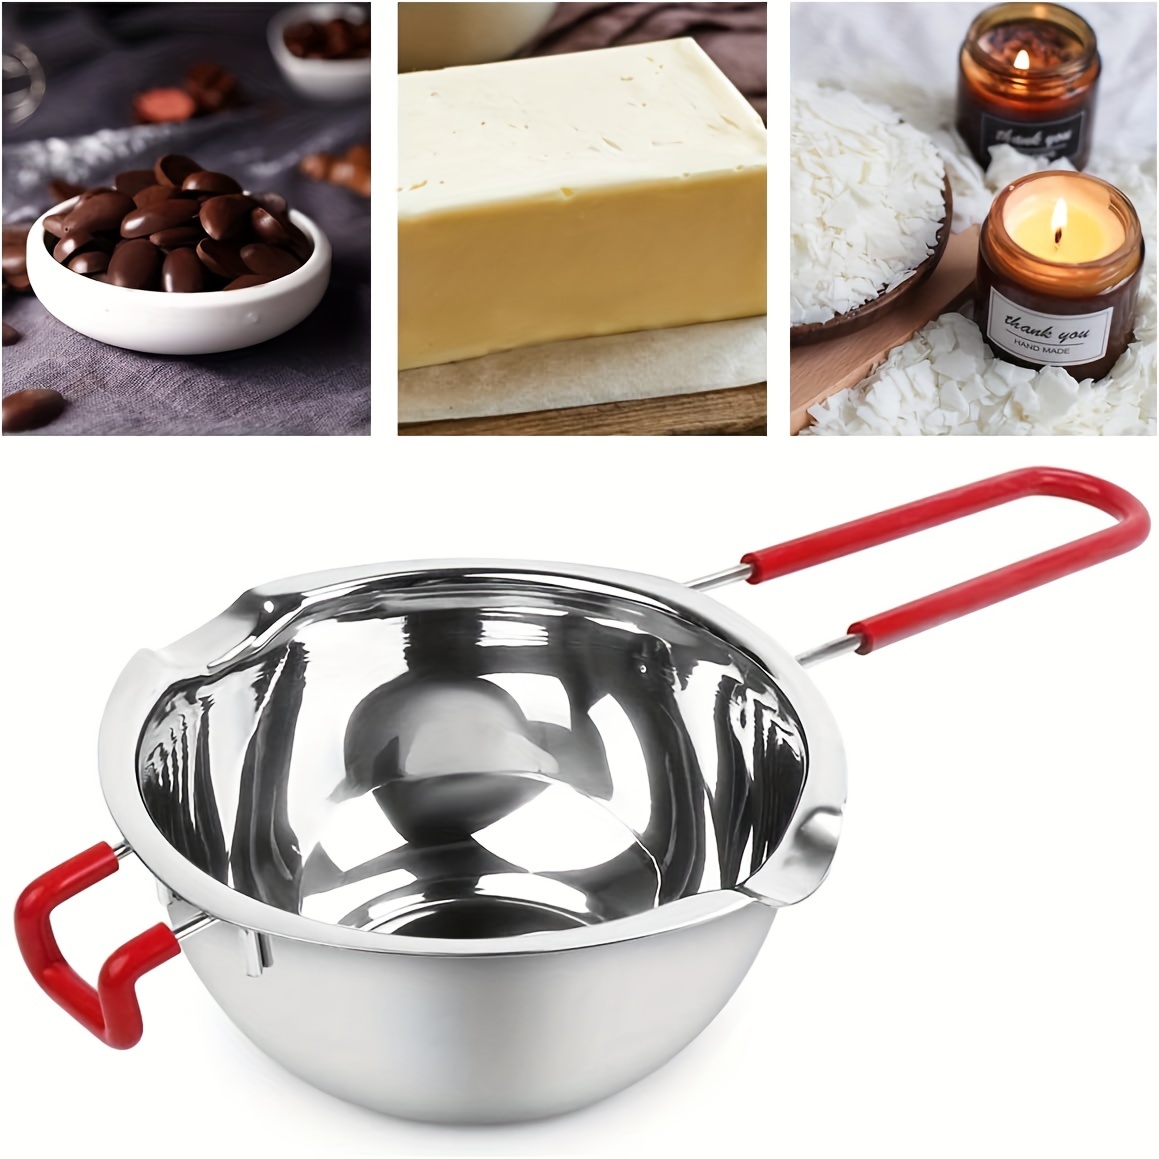 2Pcs Stainless Steel Wax Melting Pots Double Boiler for Candle